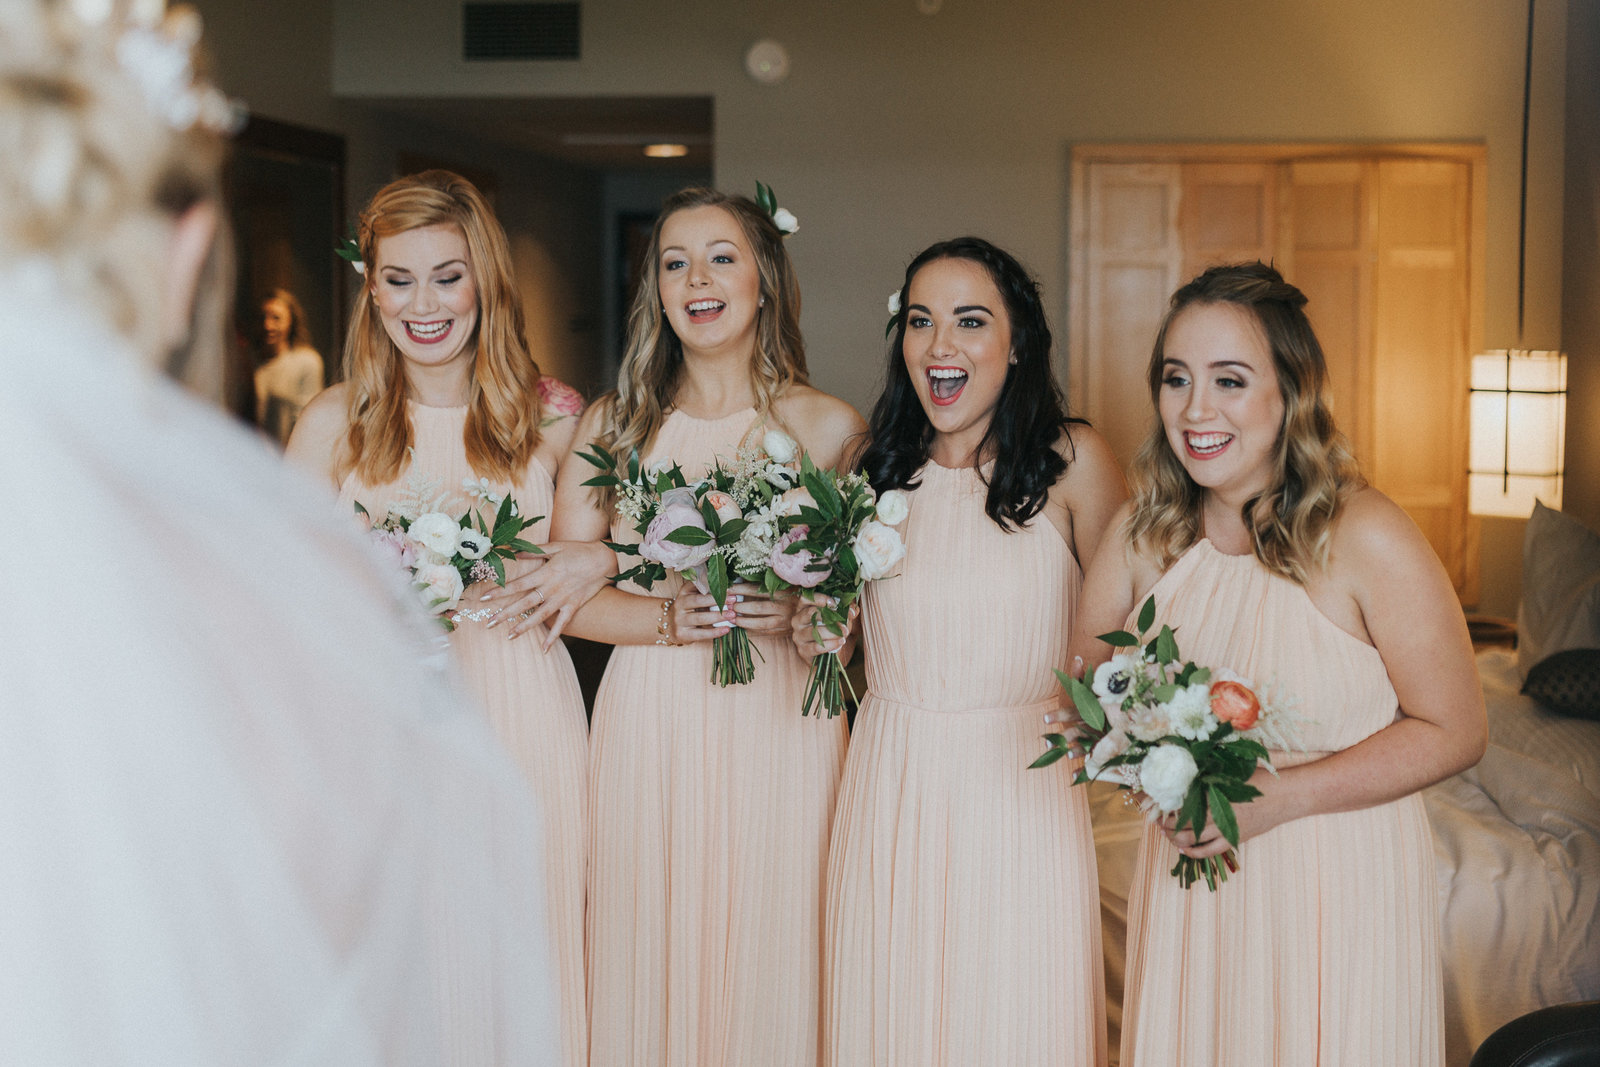 Bridesmaids seeing the bride for the first time